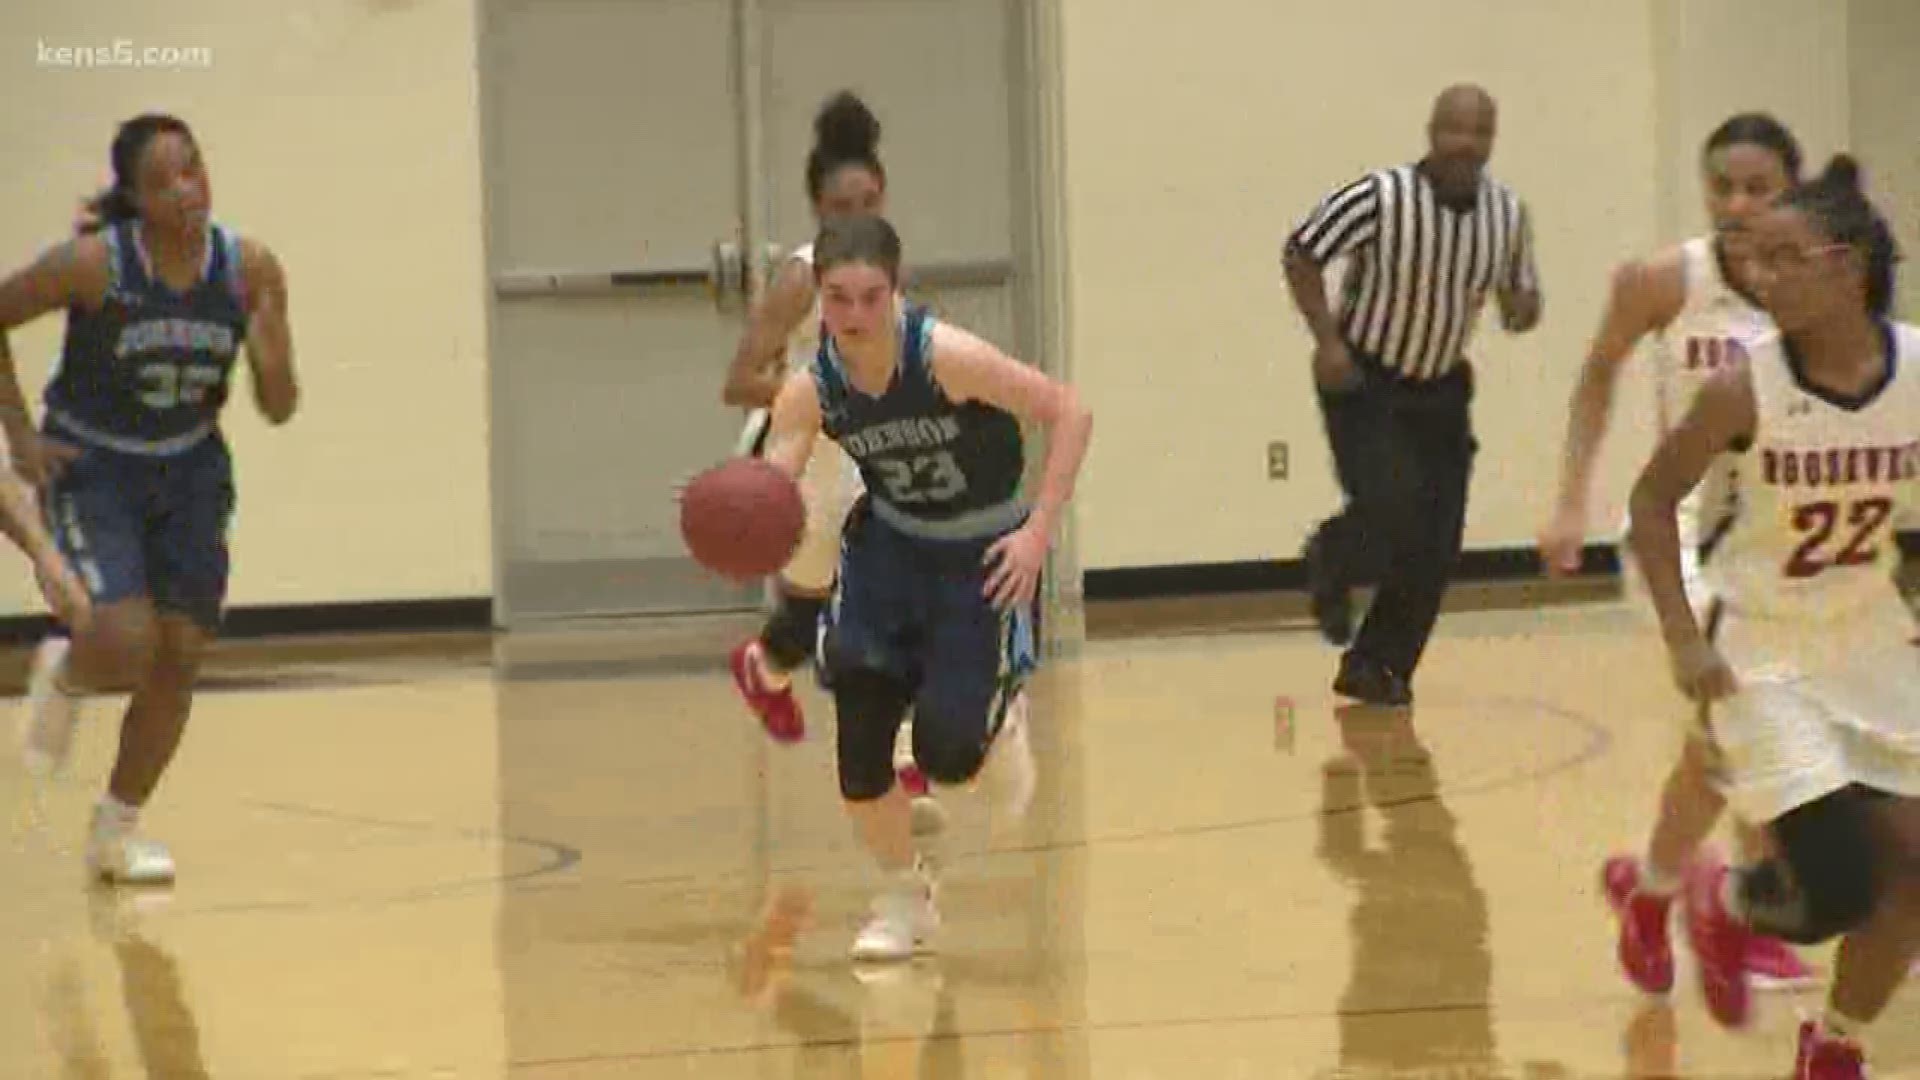 Johnson girls basketball tops Roosevelt and Stevens fell to O'Connor in another big local girls hoops game.